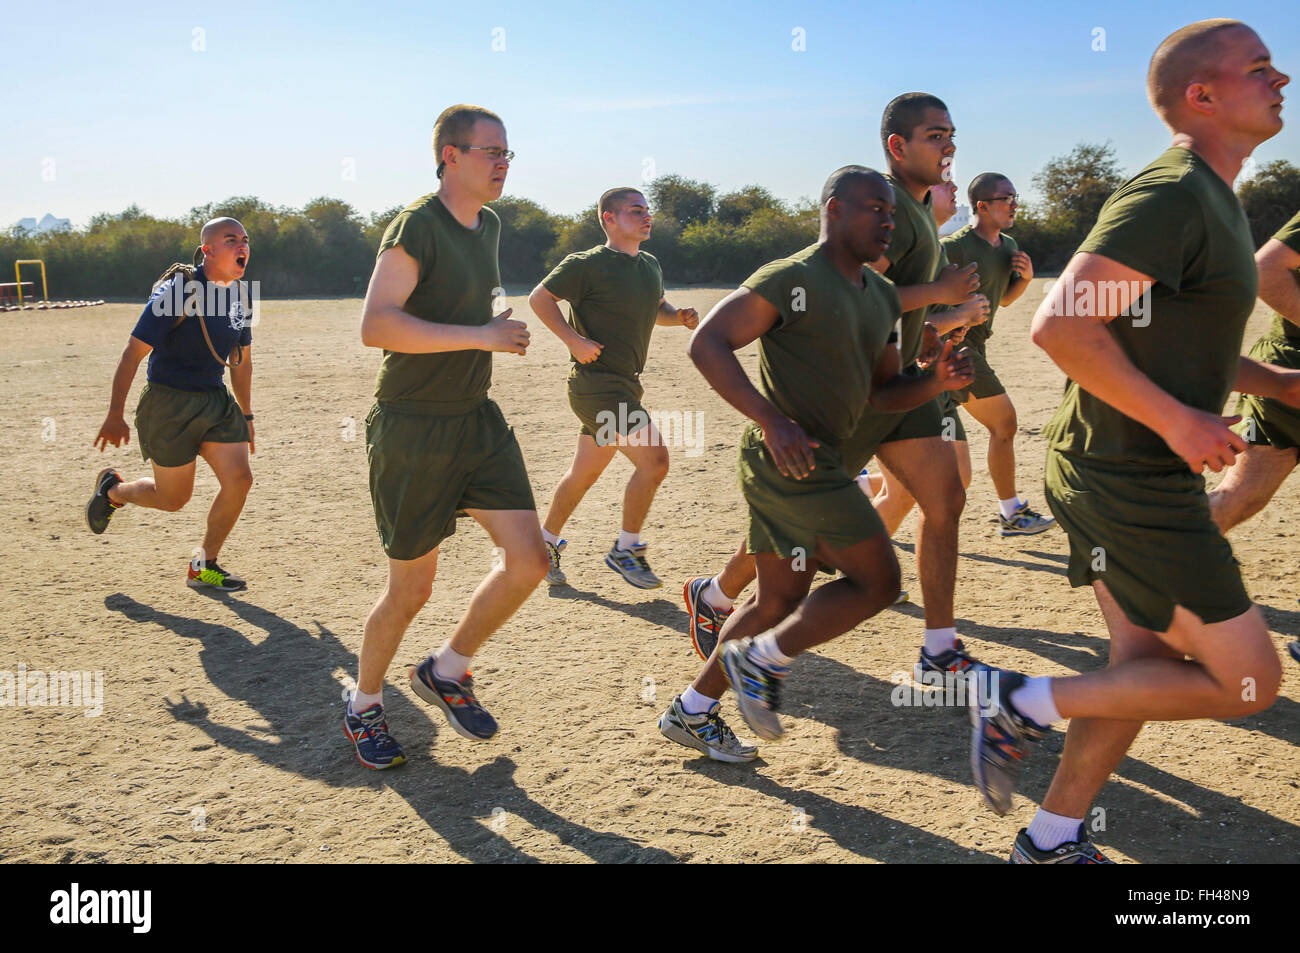 A drill instructor of Kilo Company, 3rd Recruit Training Battalion, instructs recruits to run faster during a physical training session at Marine Corps Recruit Depot San Diego, Feb. 22. If the recruits moved slowly, drill instructors motivated them to move faster and to get the most out of the session. Annually, more than 17,000 males recruited from the Western Recruiting Region are trained at MCRD San Diego. Kilo Company is scheduled to graduate May 6. Stock Photo